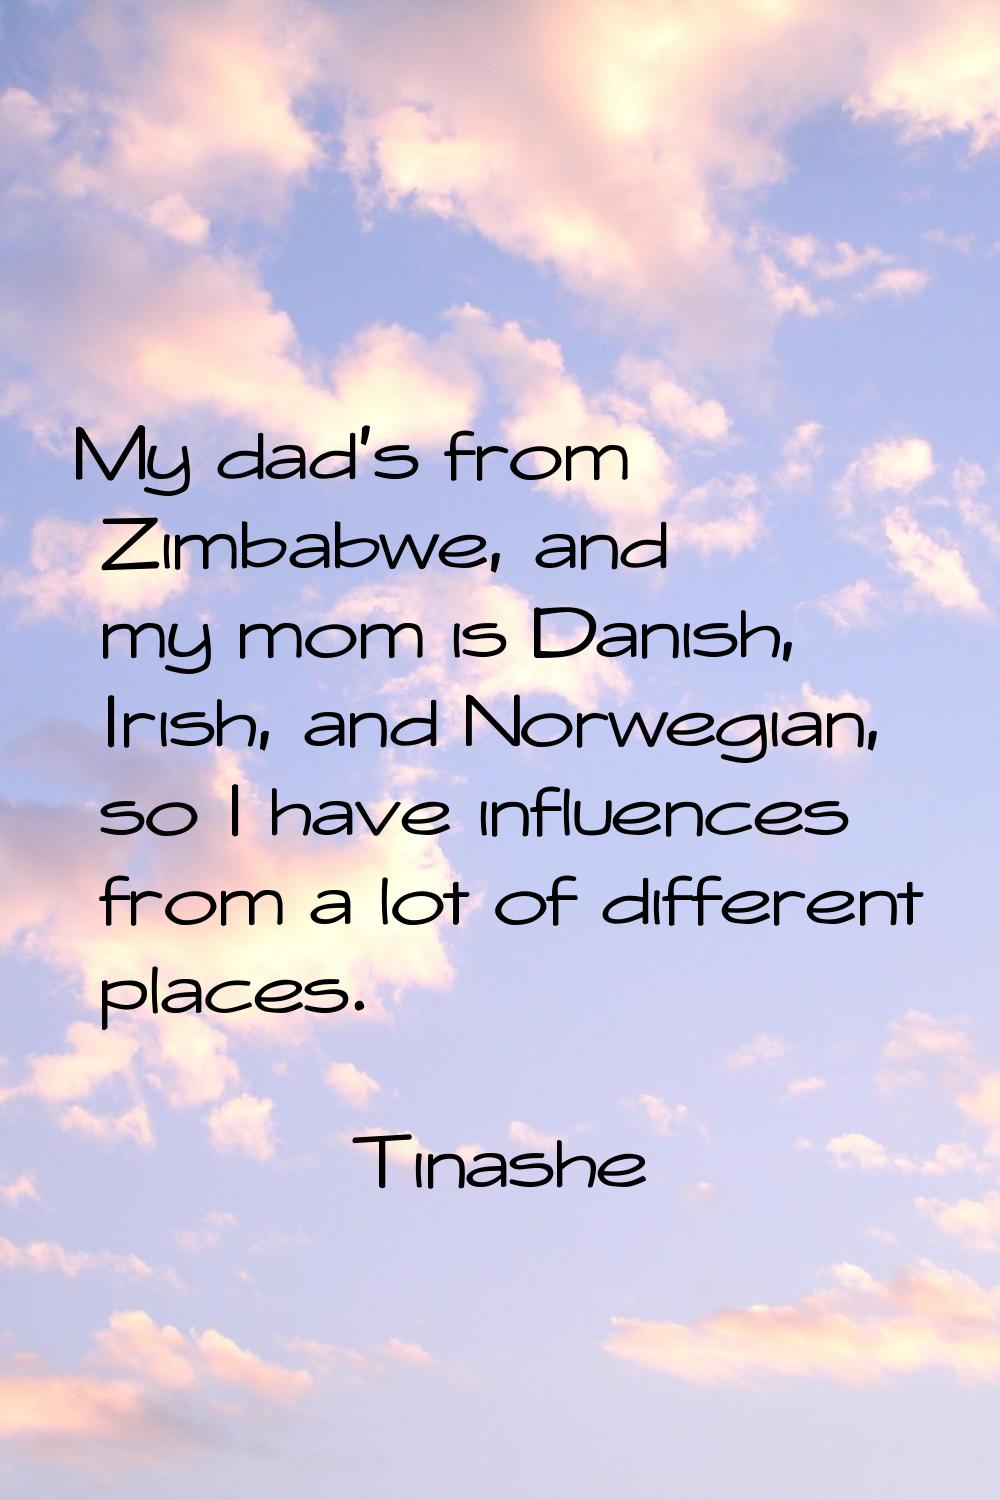 My dad's from Zimbabwe, and my mom is Danish, Irish, and Norwegian, so I have influences from a lot